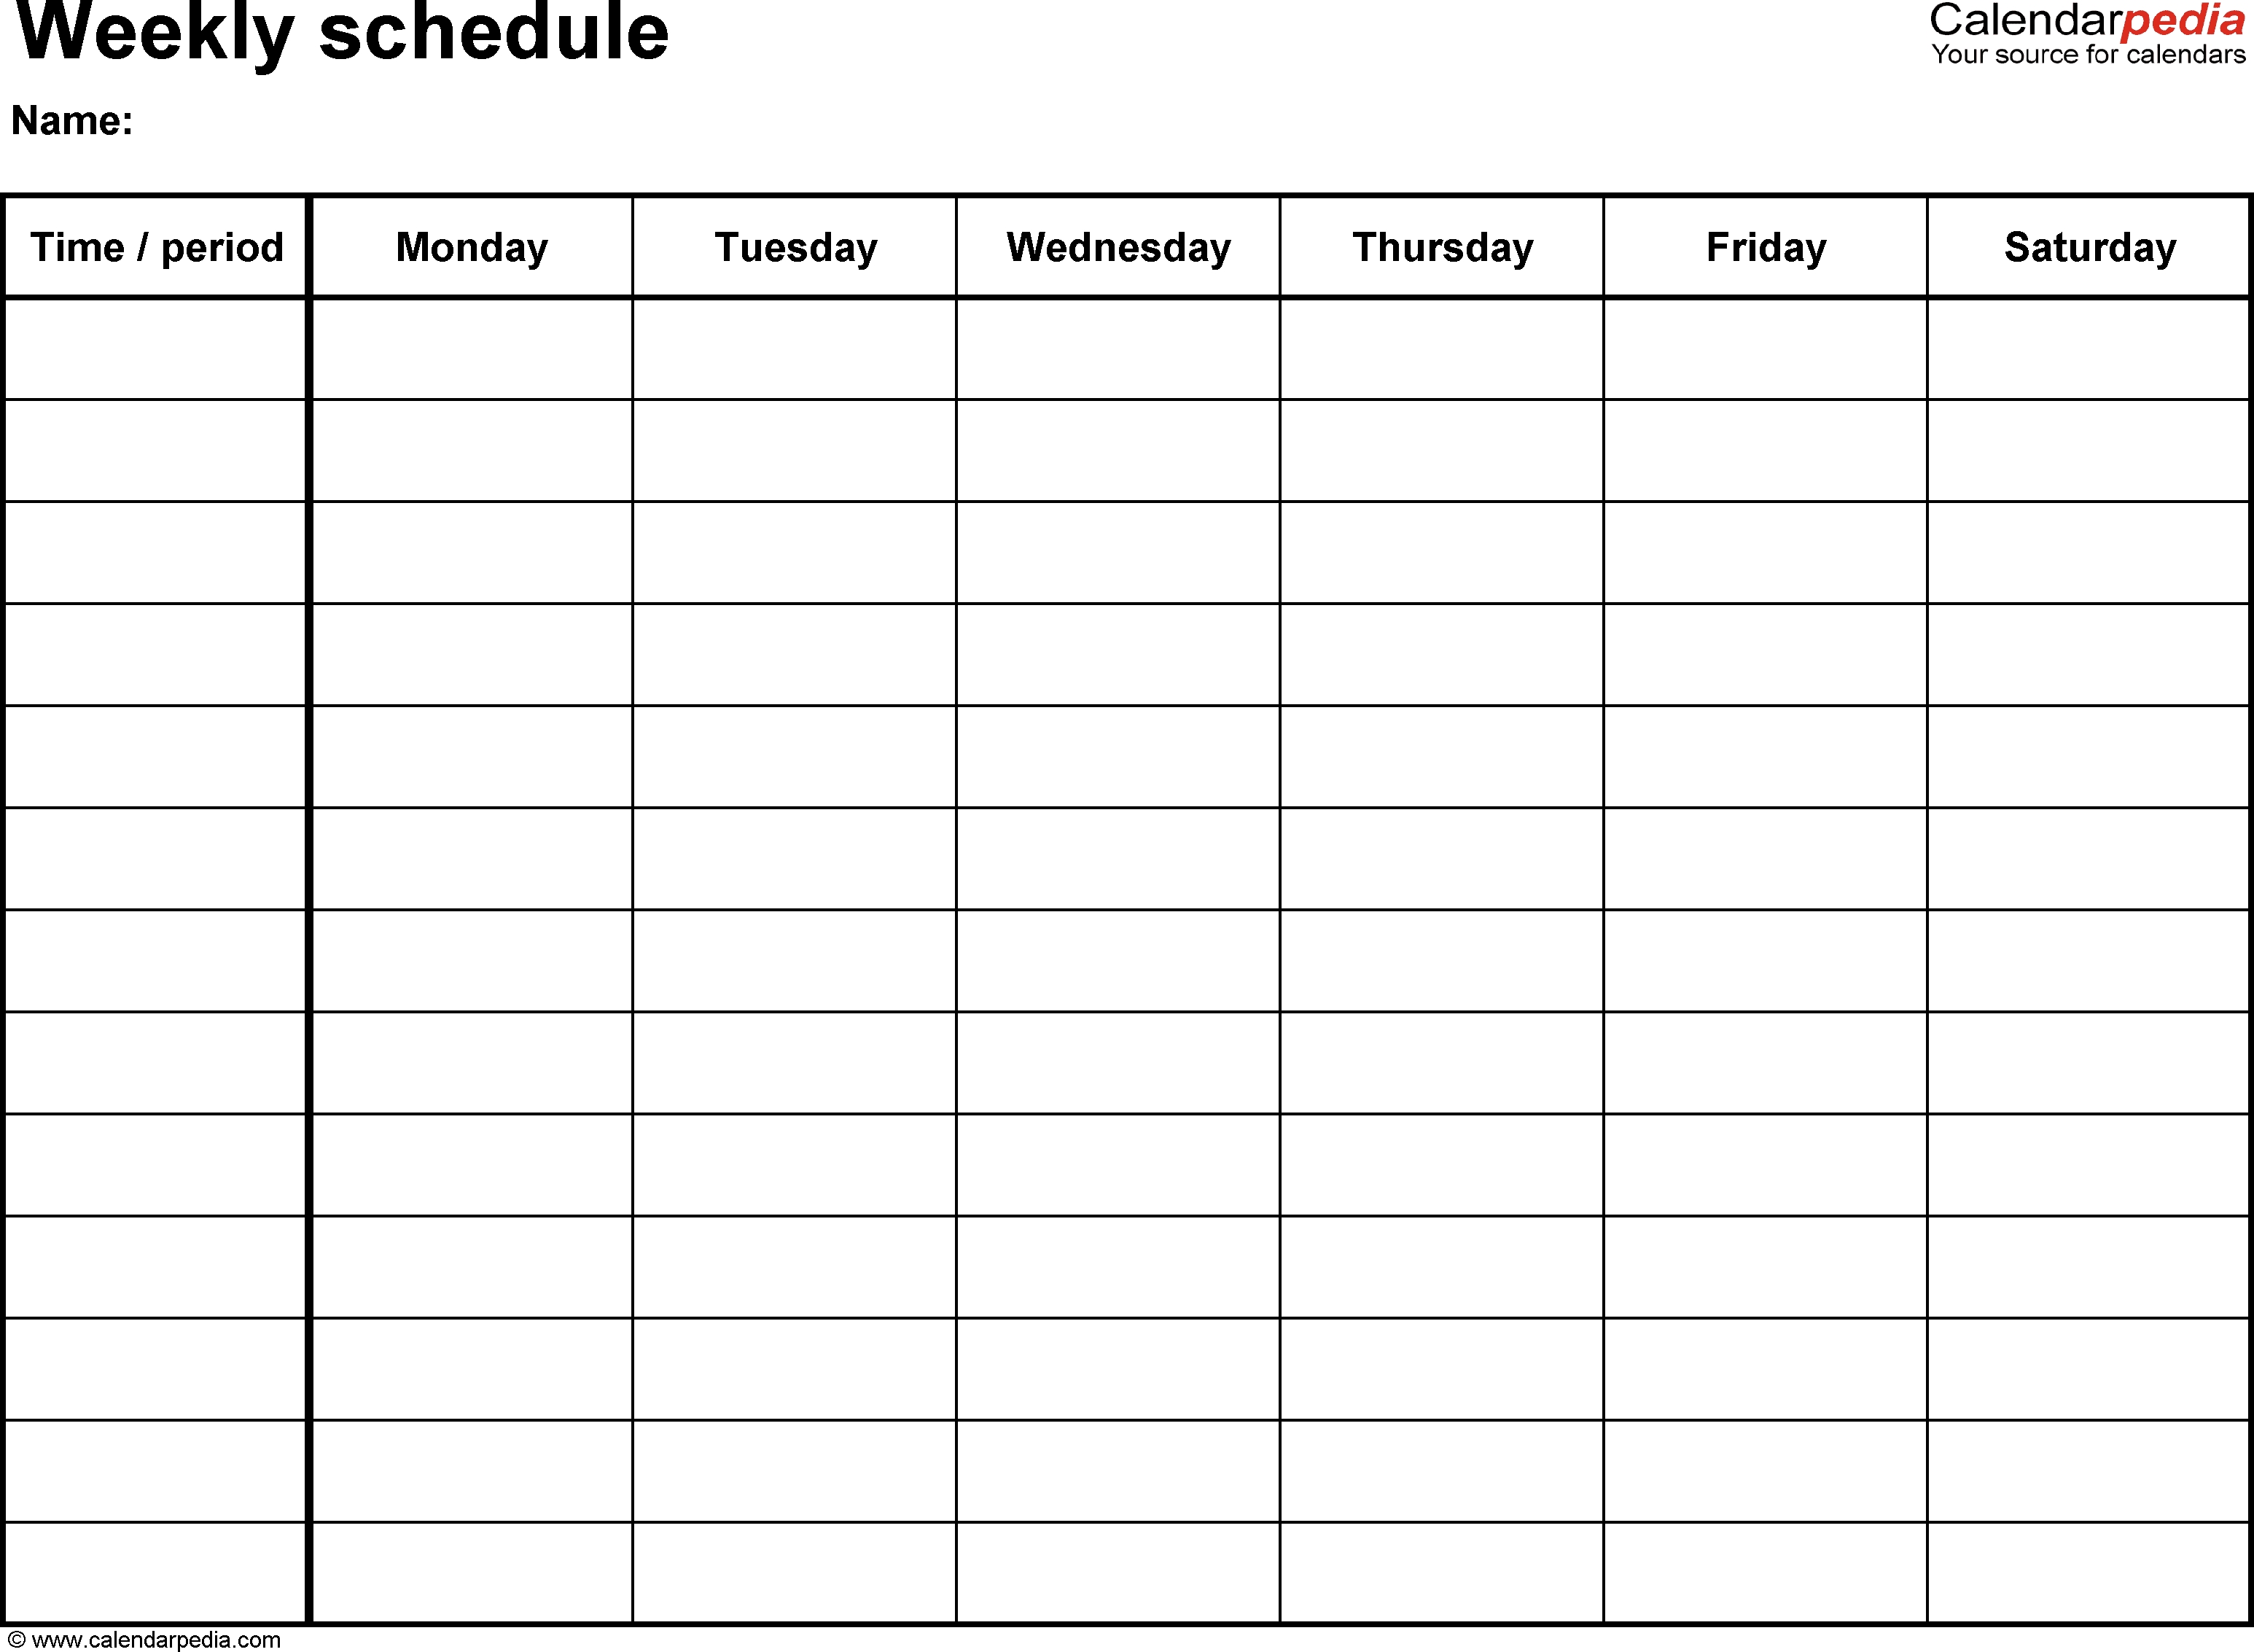 Free Weekly Schedule Templates For Word - 18 Templates Printable Blank Caldendar Monday - Friday